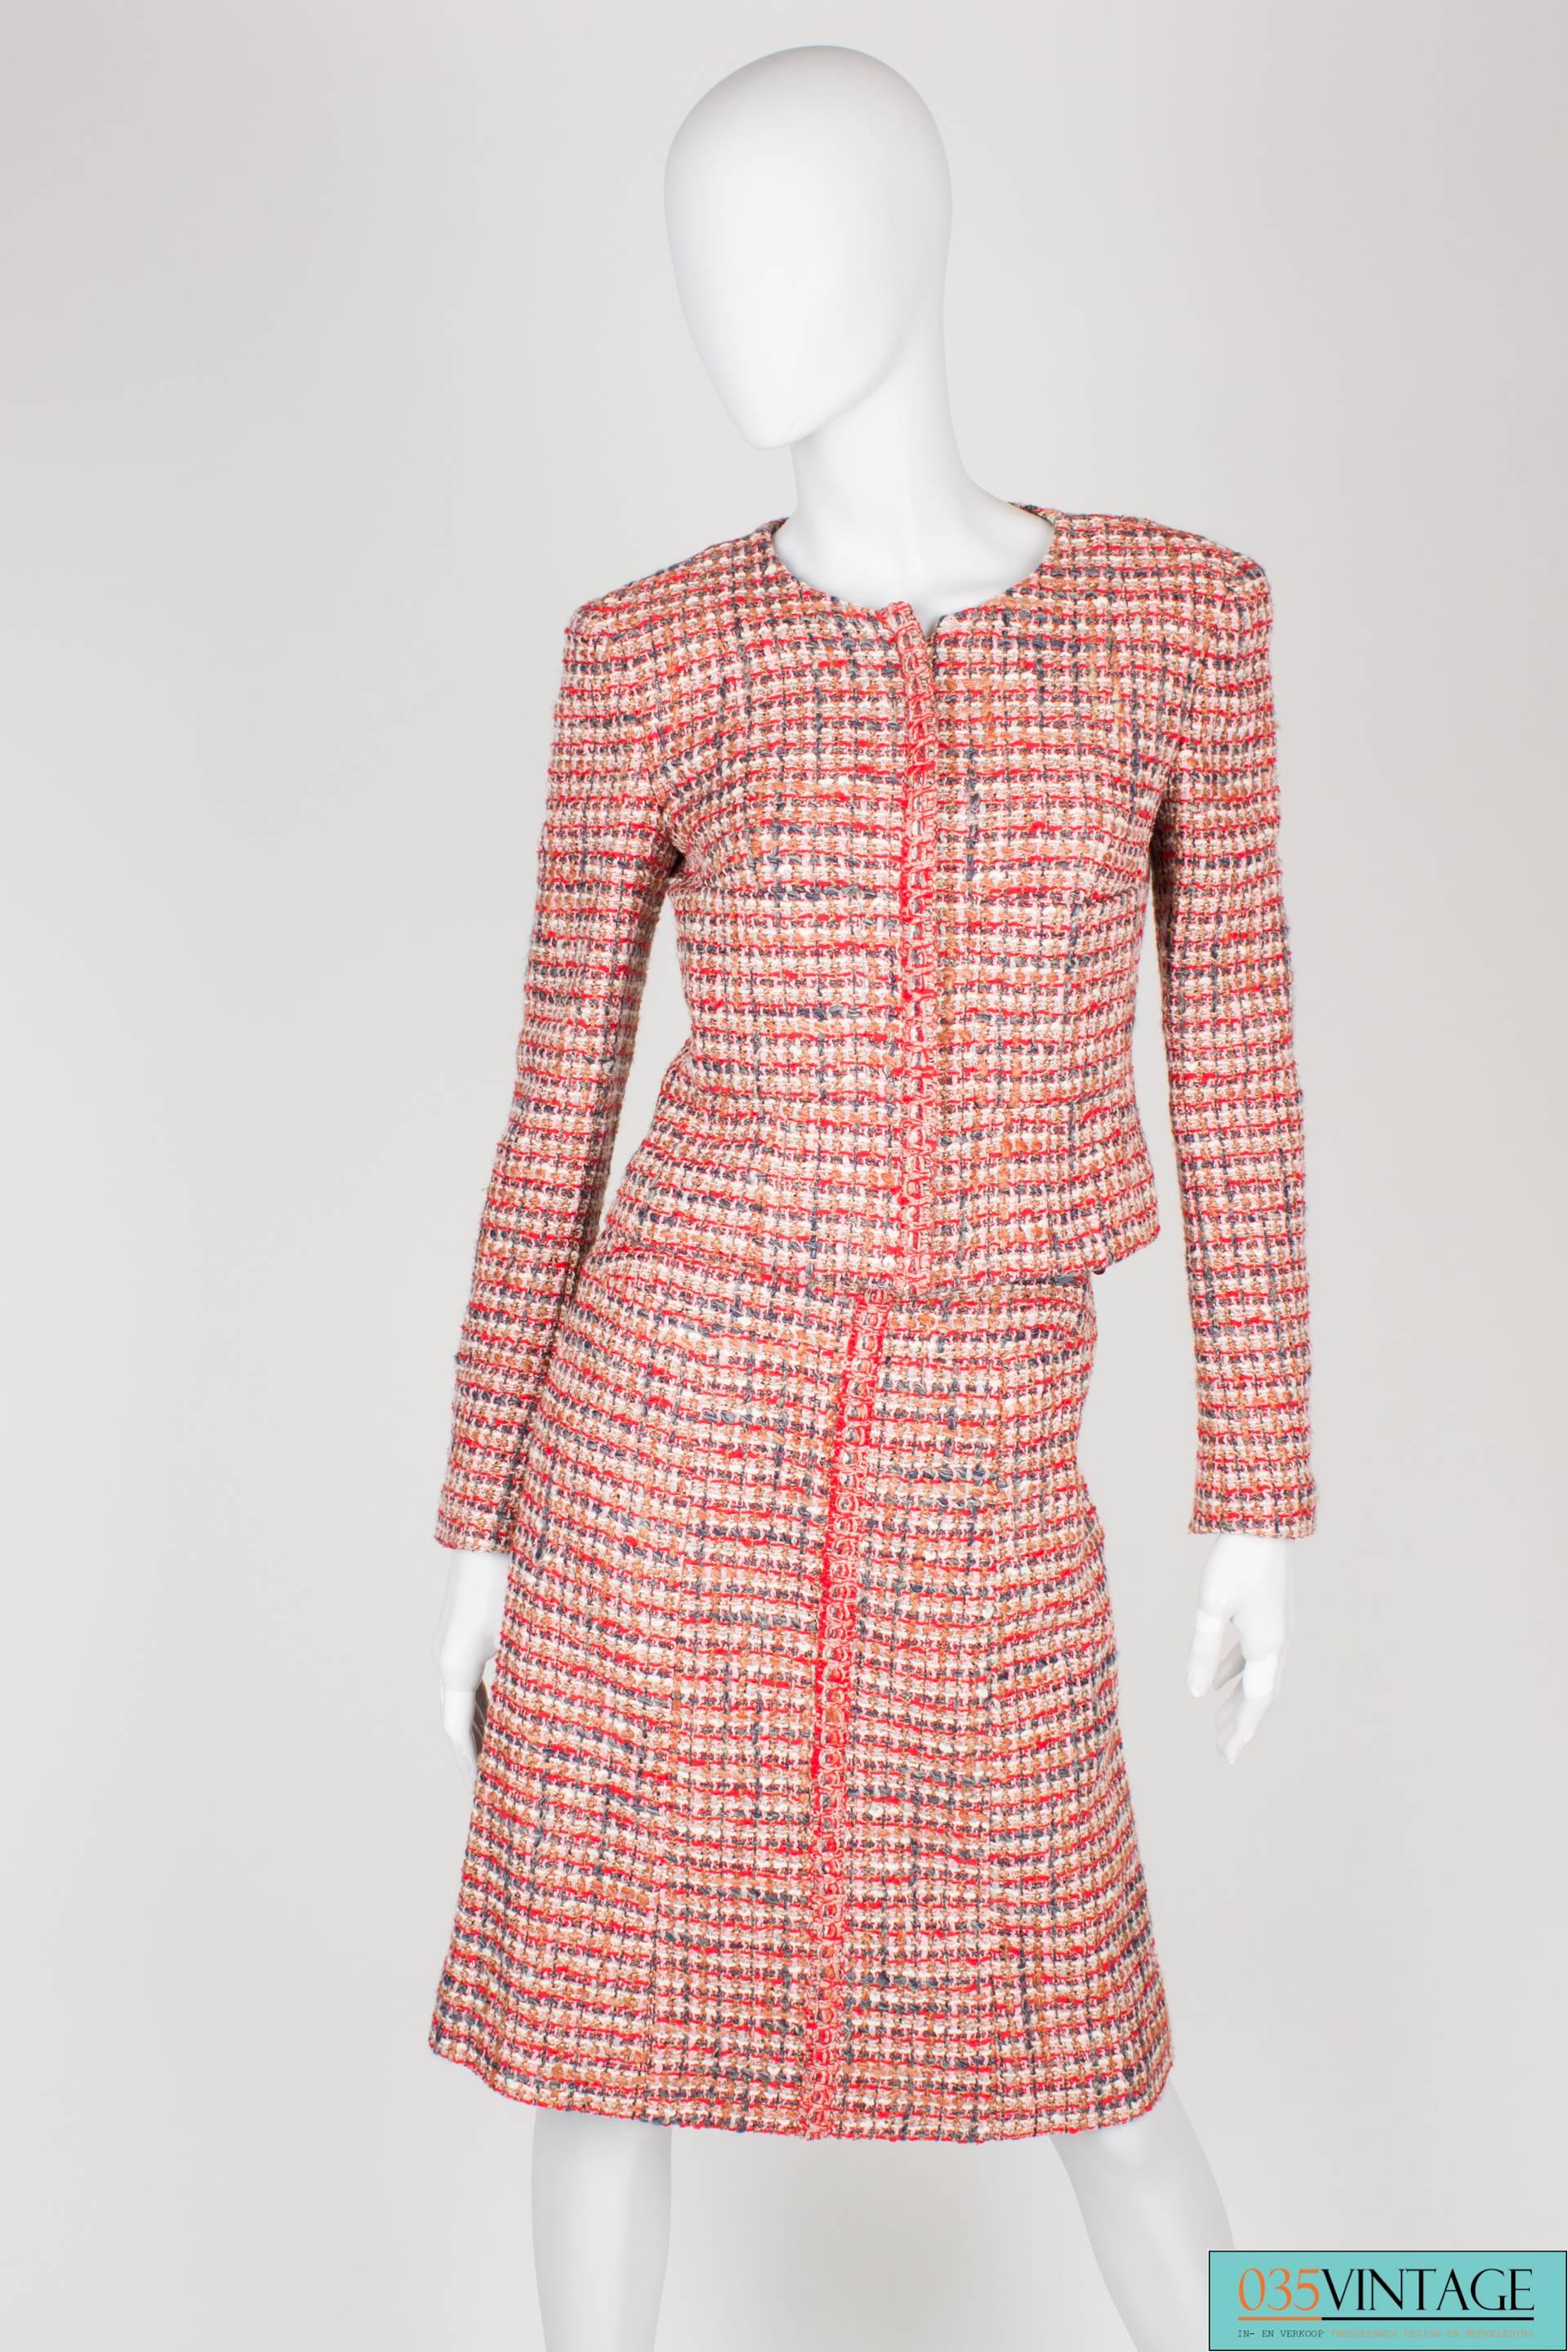 Brown Chanel 3-pcs Suit Jacket, Skirt & Top - red/gray/pink/white 2003